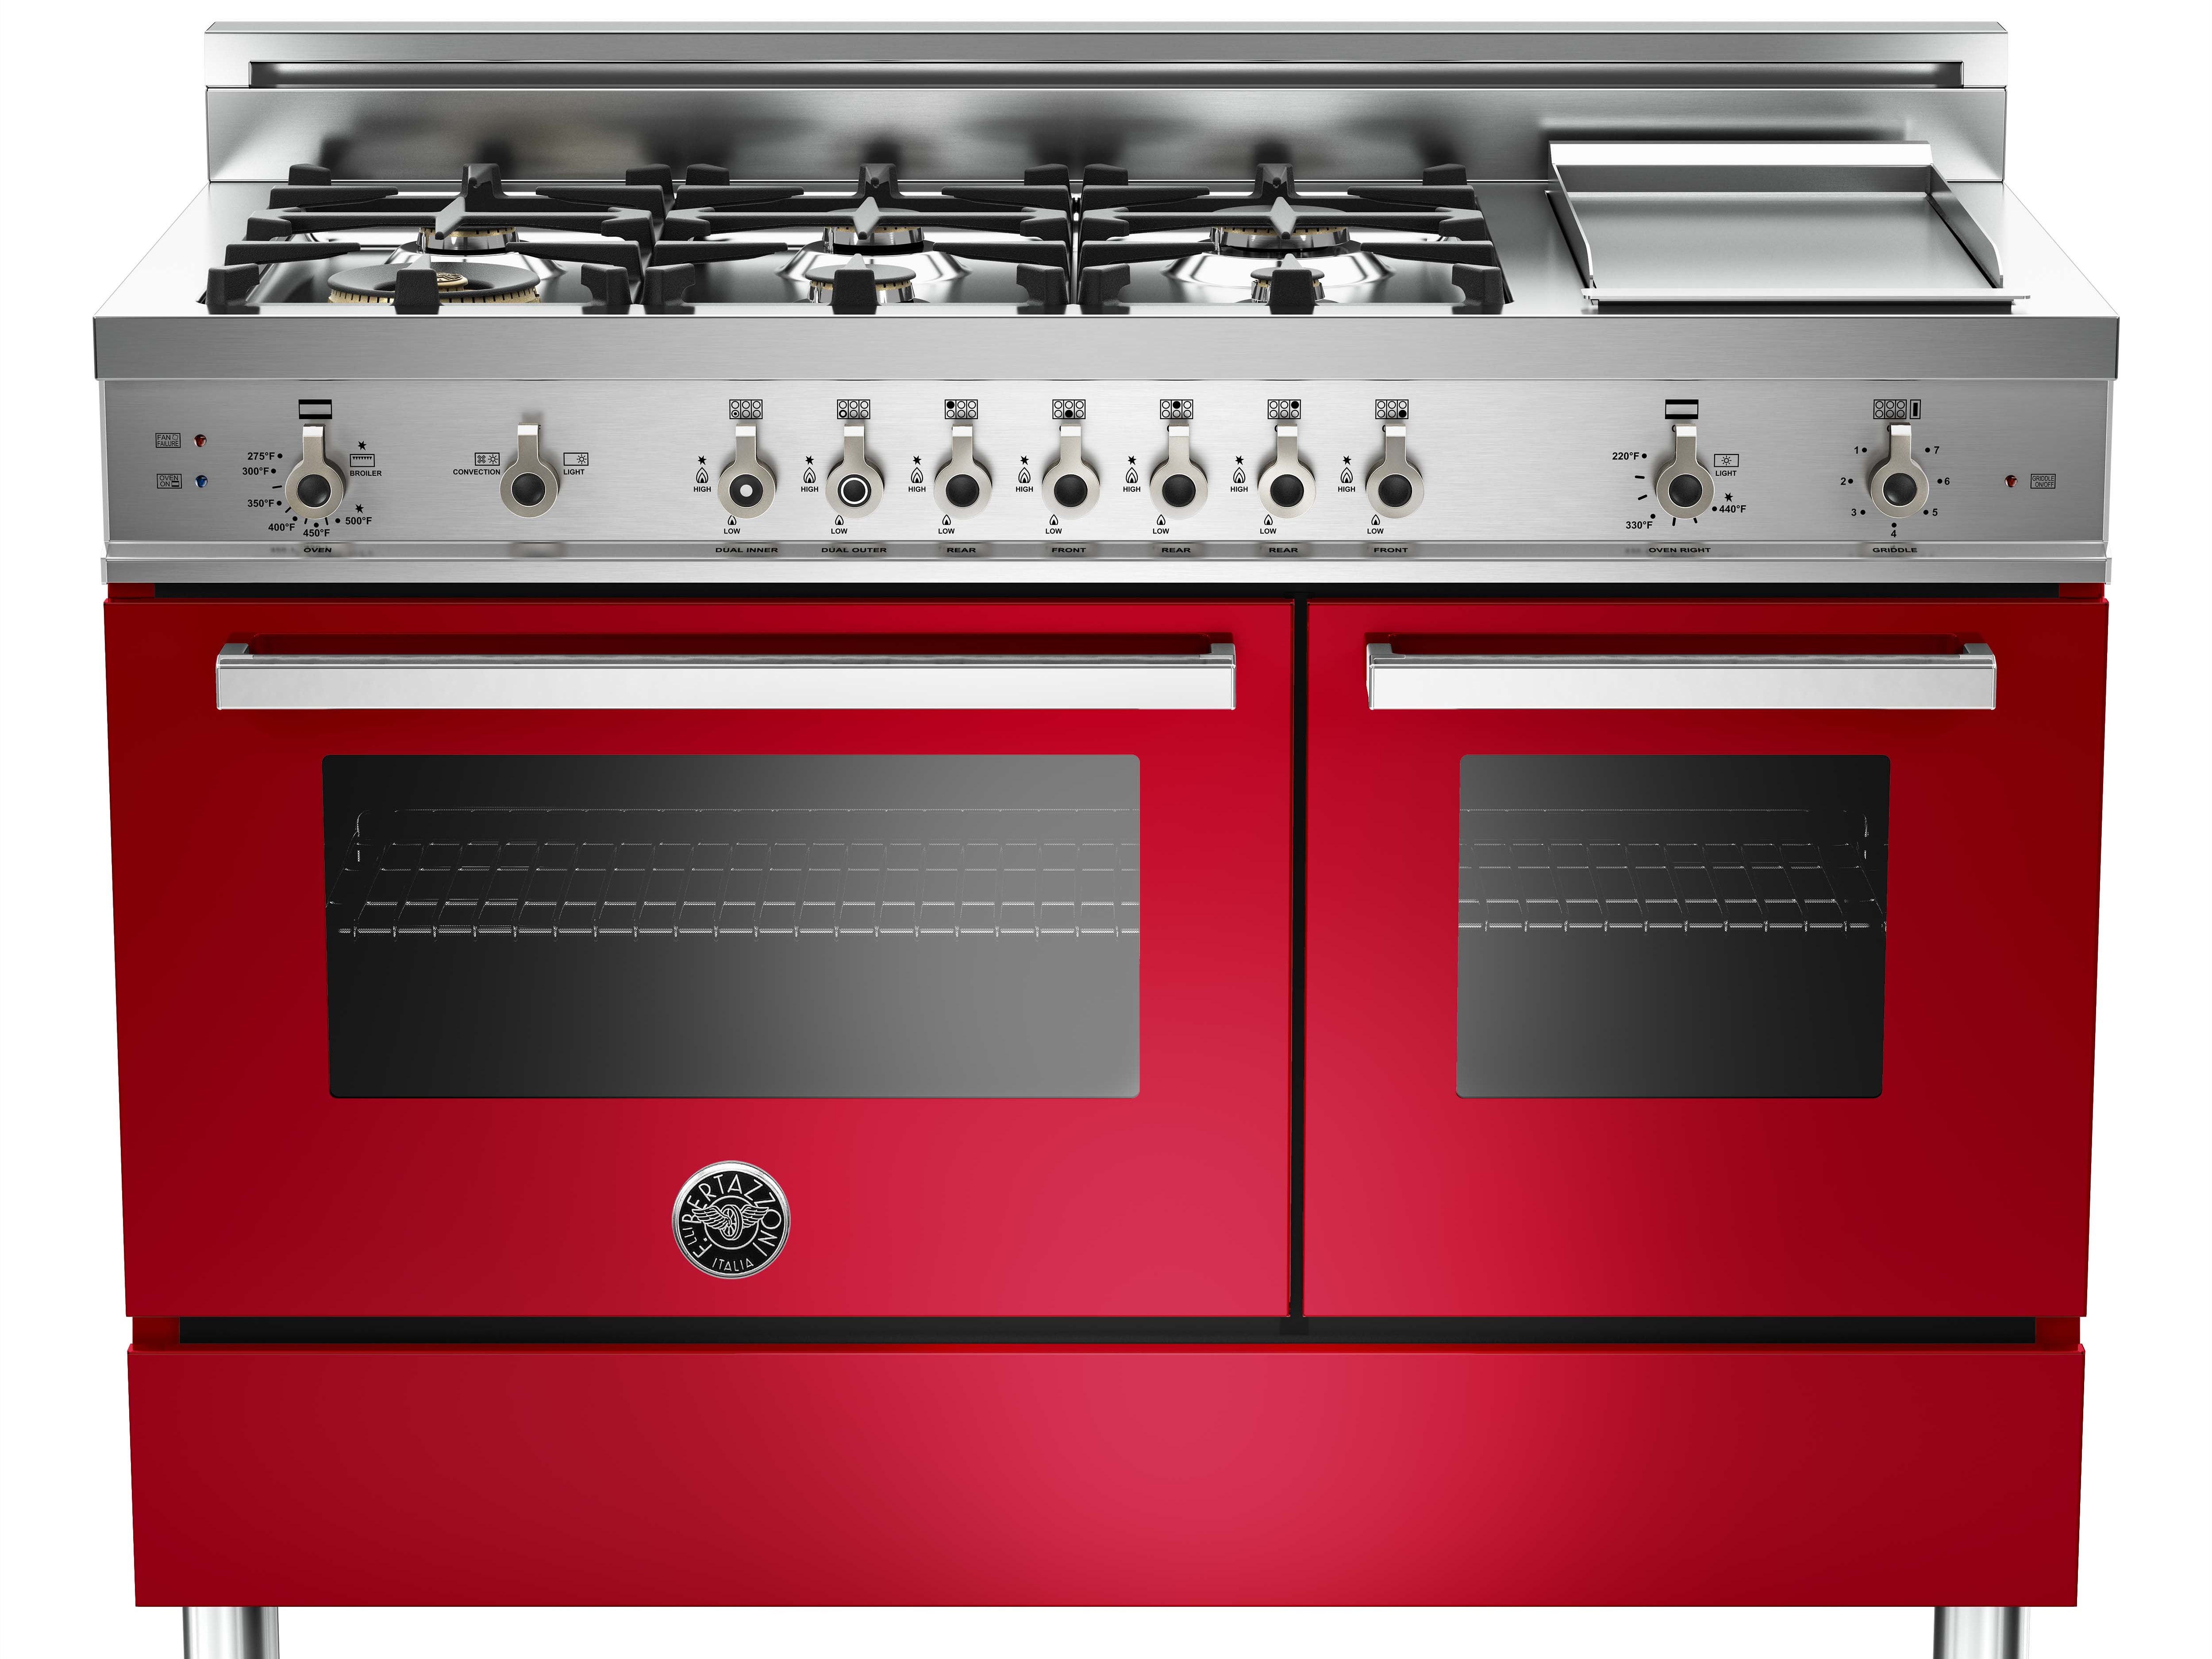 High End Appliances For The Home